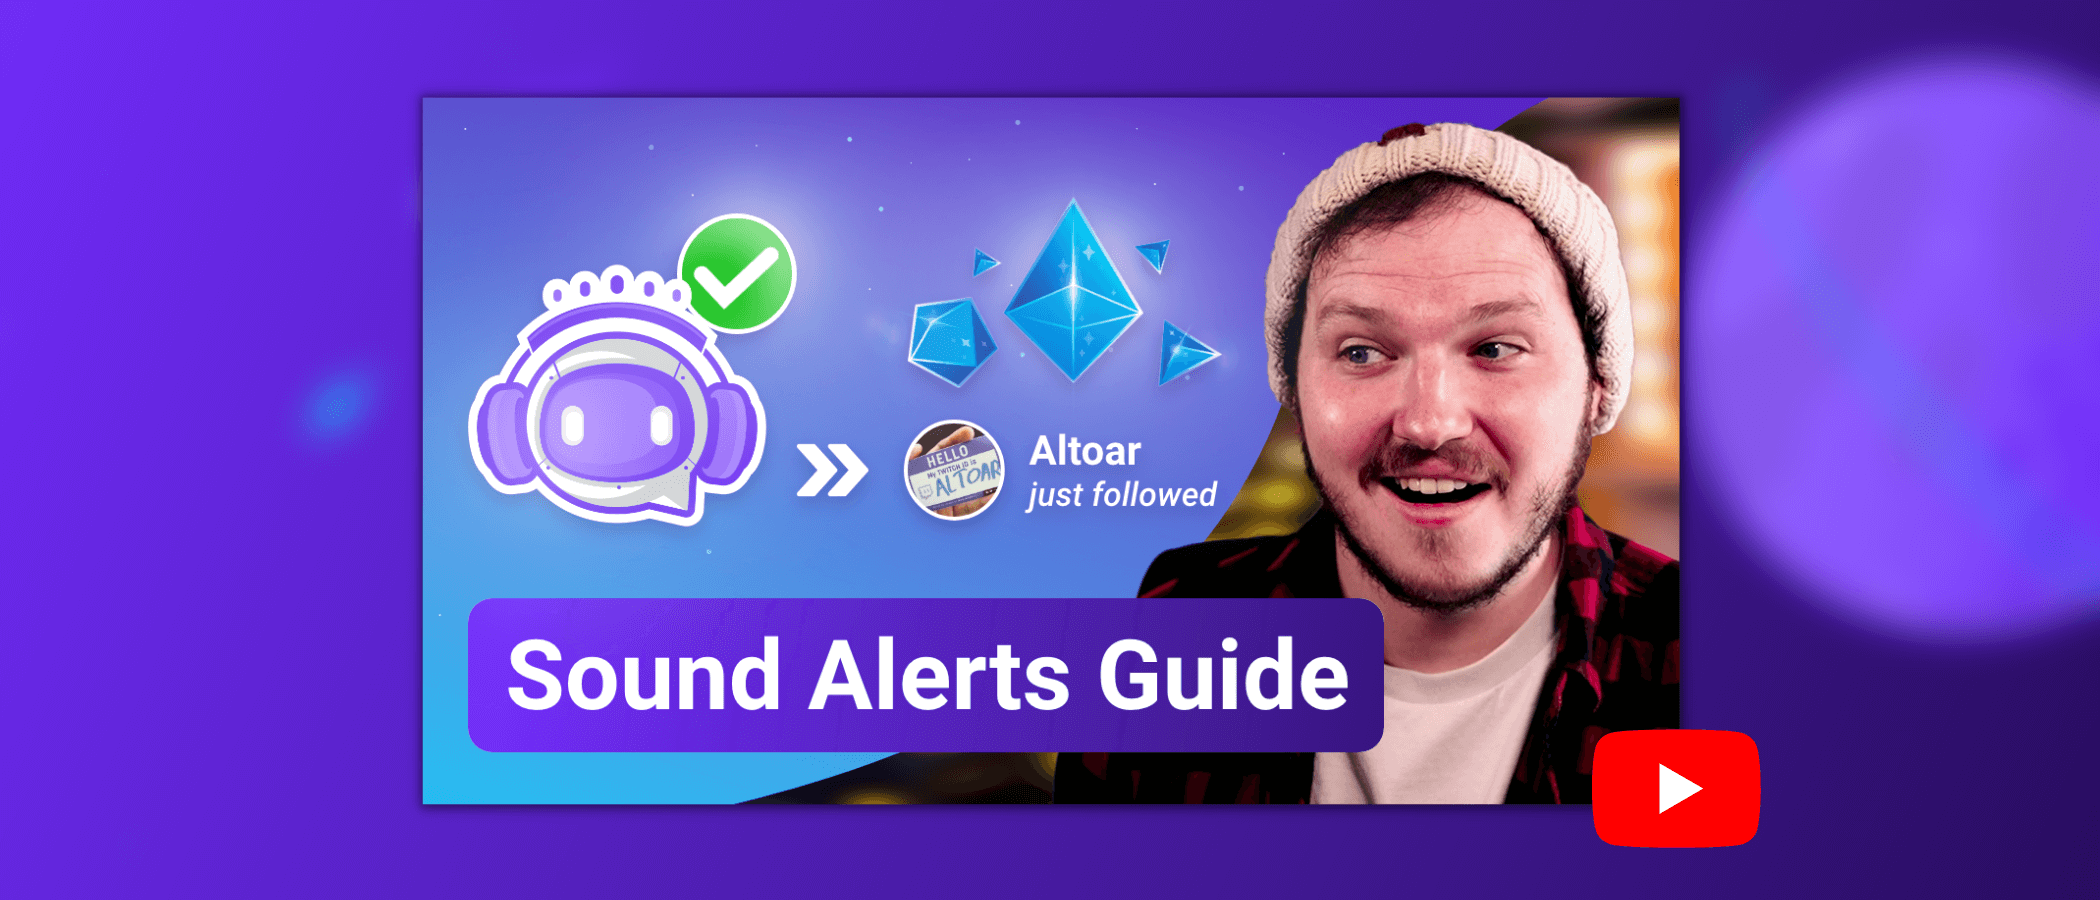 This image shows the thumbnail of the Sound Alerts setup guide video.